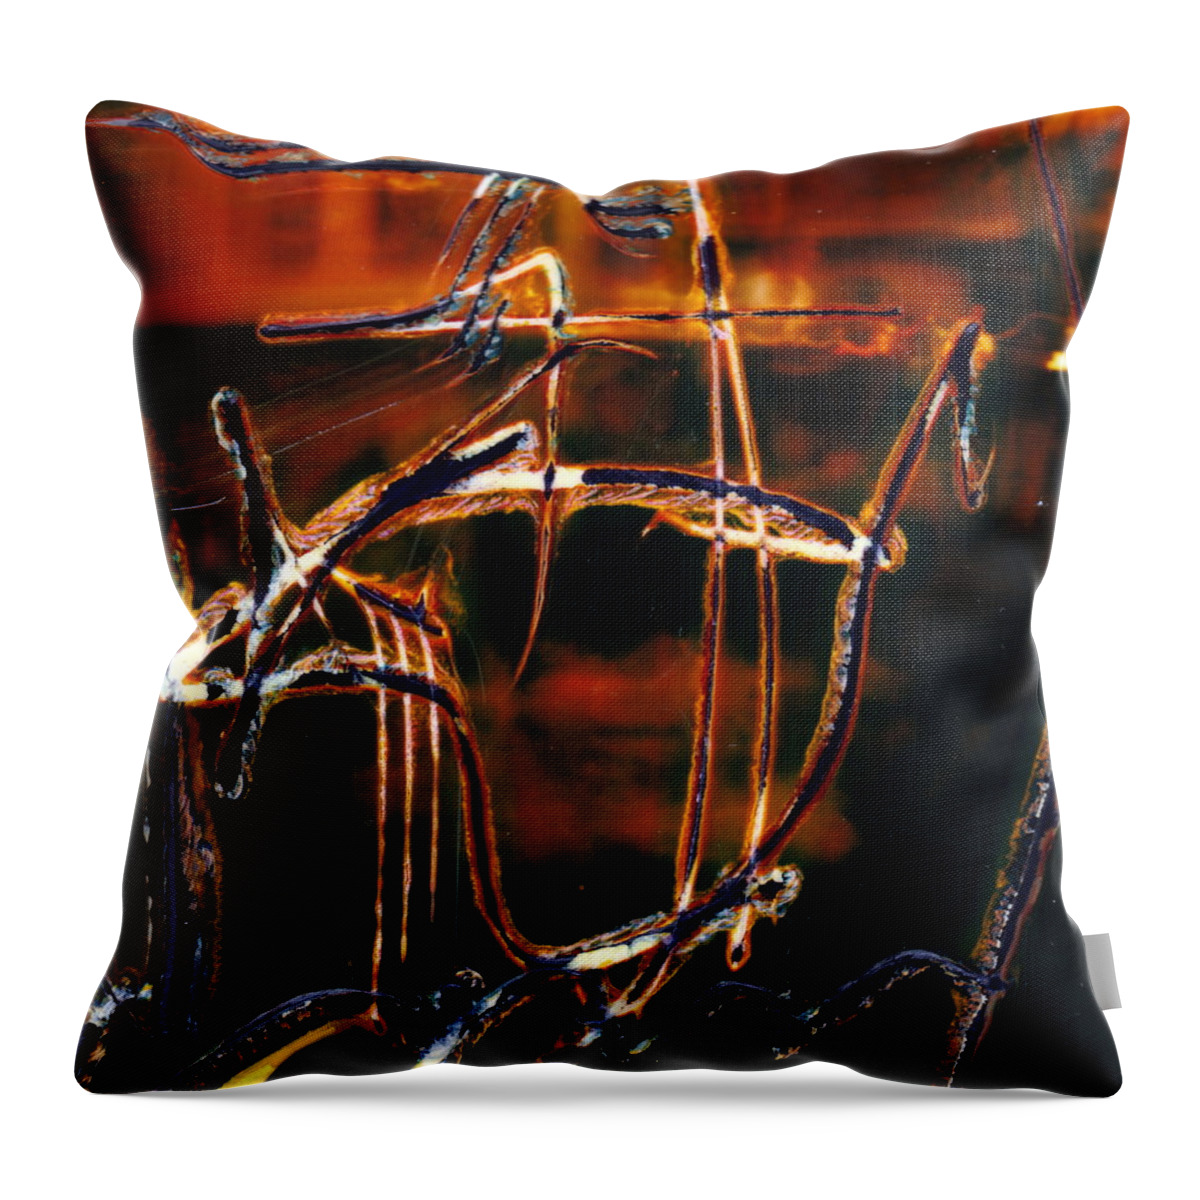  Throw Pillow featuring the photograph Musical Lift by JC Armbruster